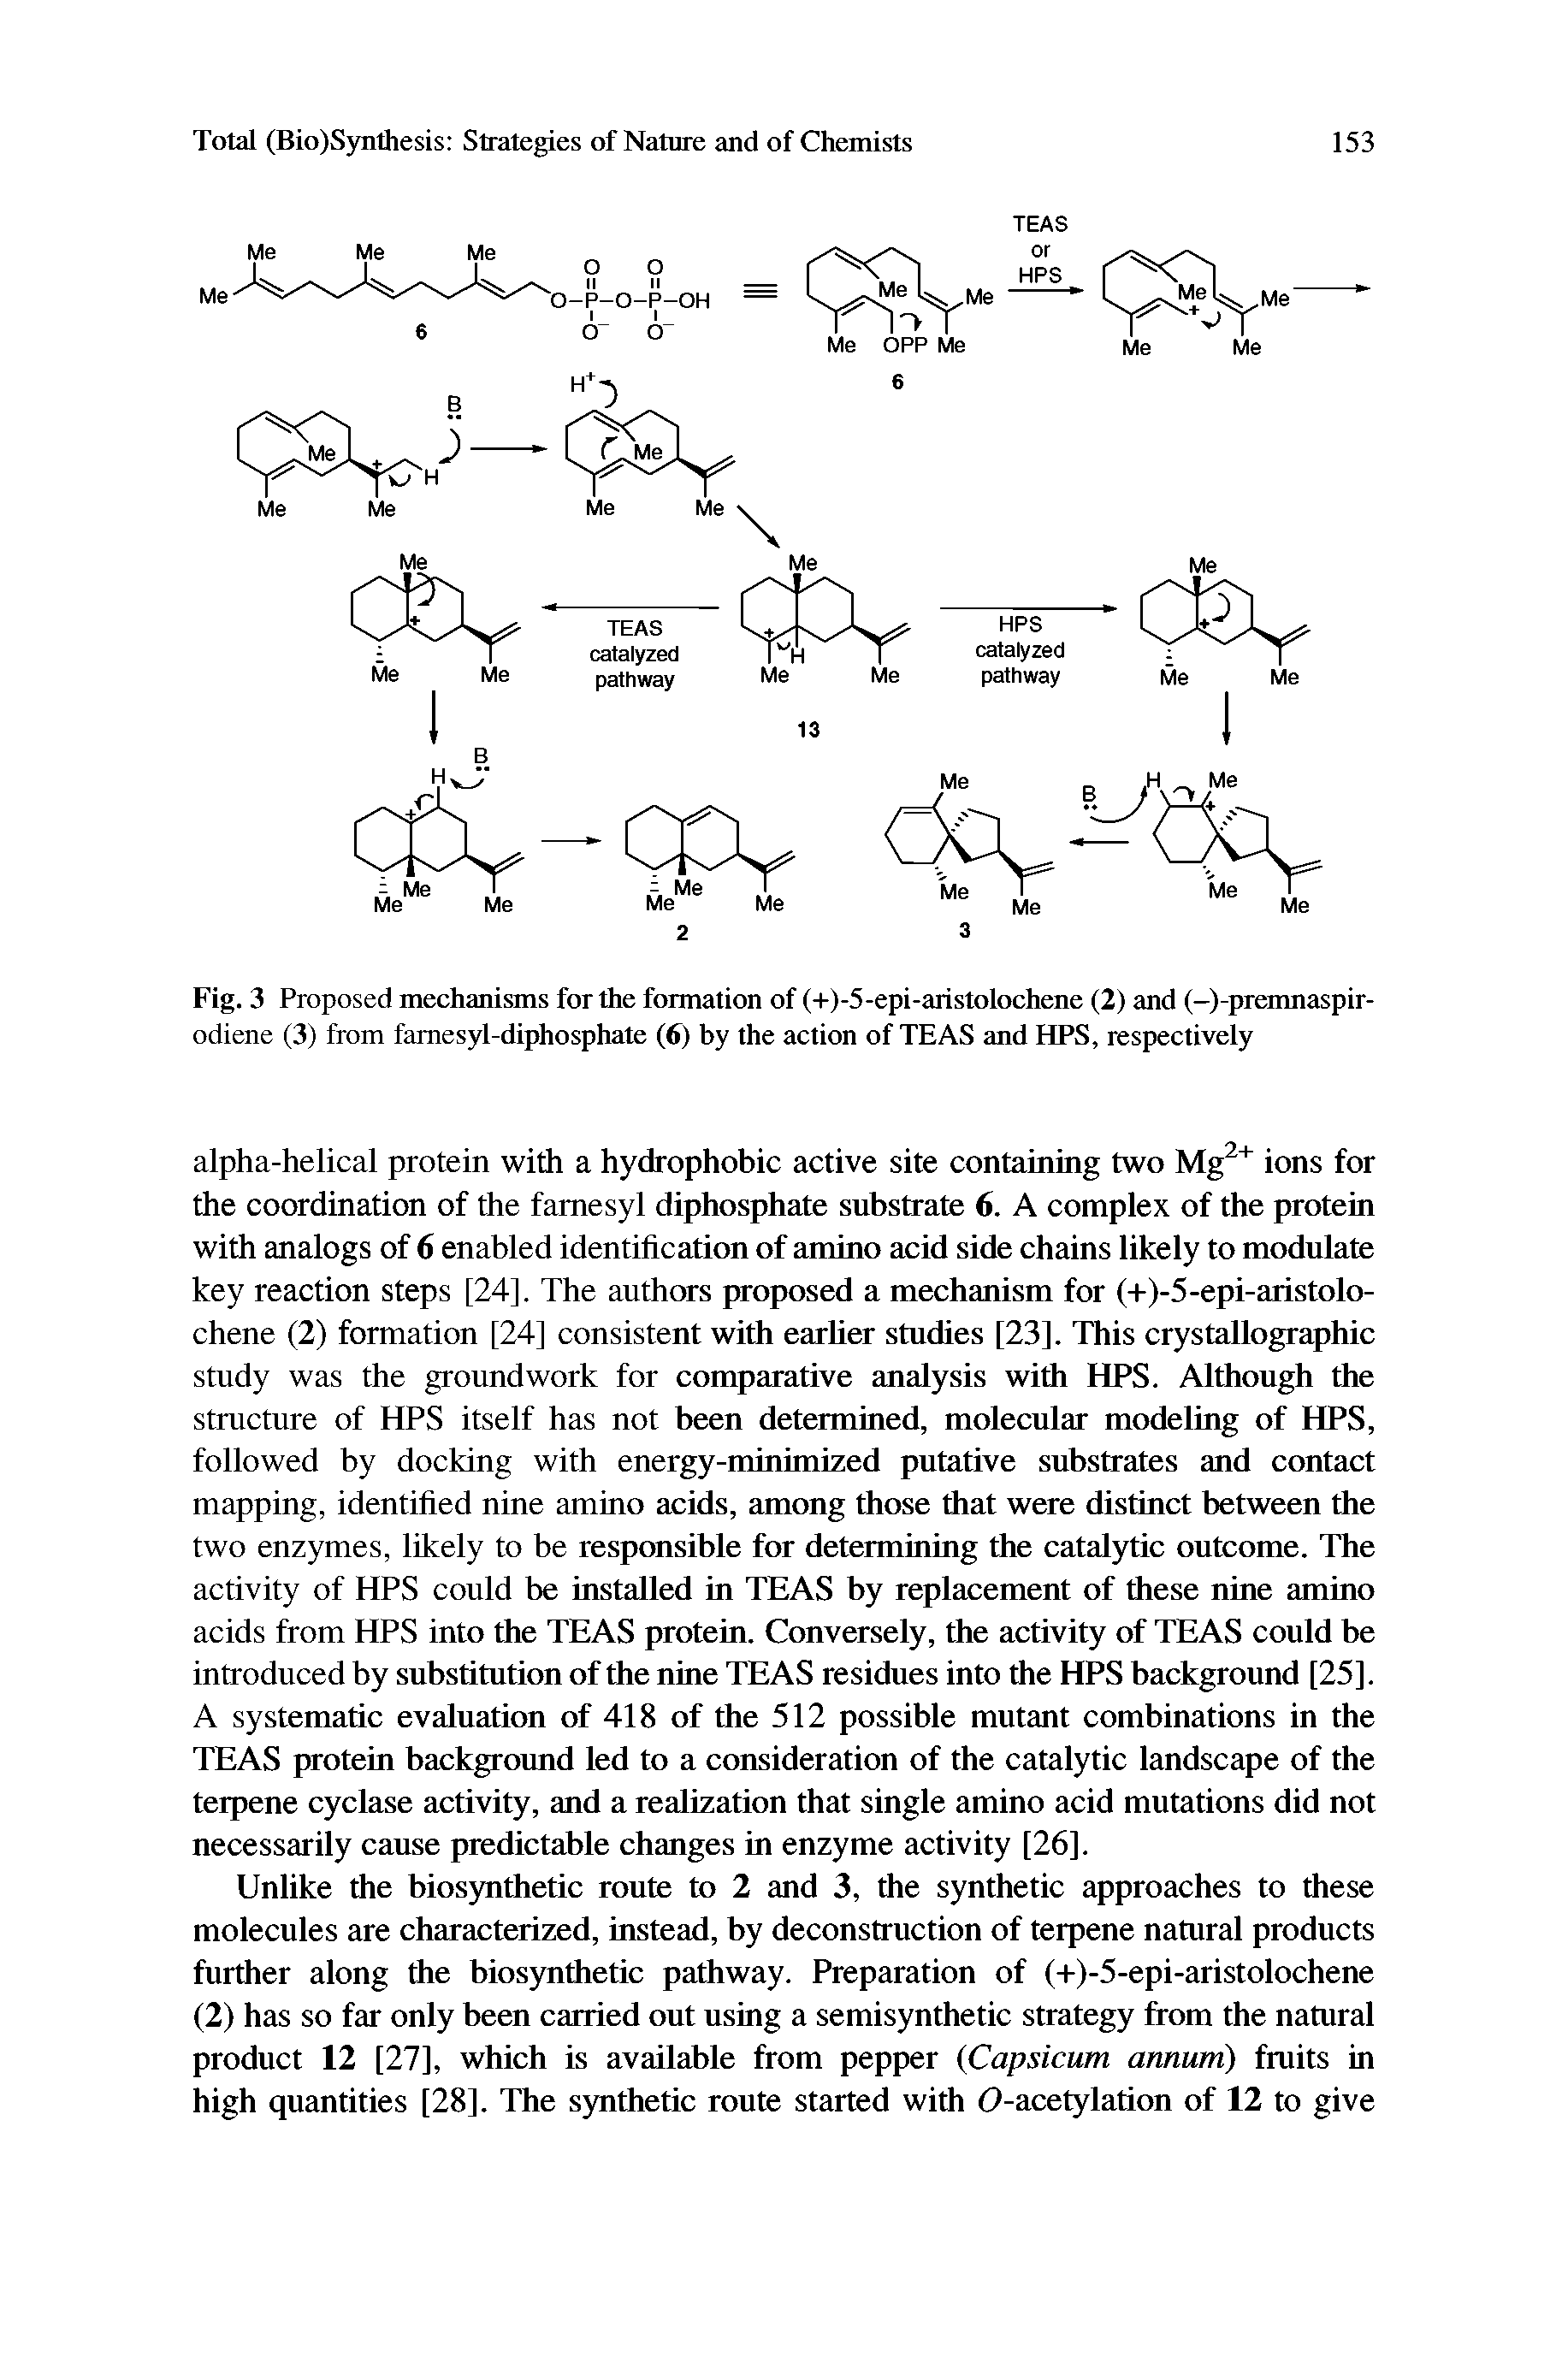 Fig. 3 Proposed mechanisms for the formation of (+)-5-epi-aristolochene (2) and (-)-premnaspir-odiene (3) from famesyl-diphosphate (6) by the action of TEAS and HPS, respectively...